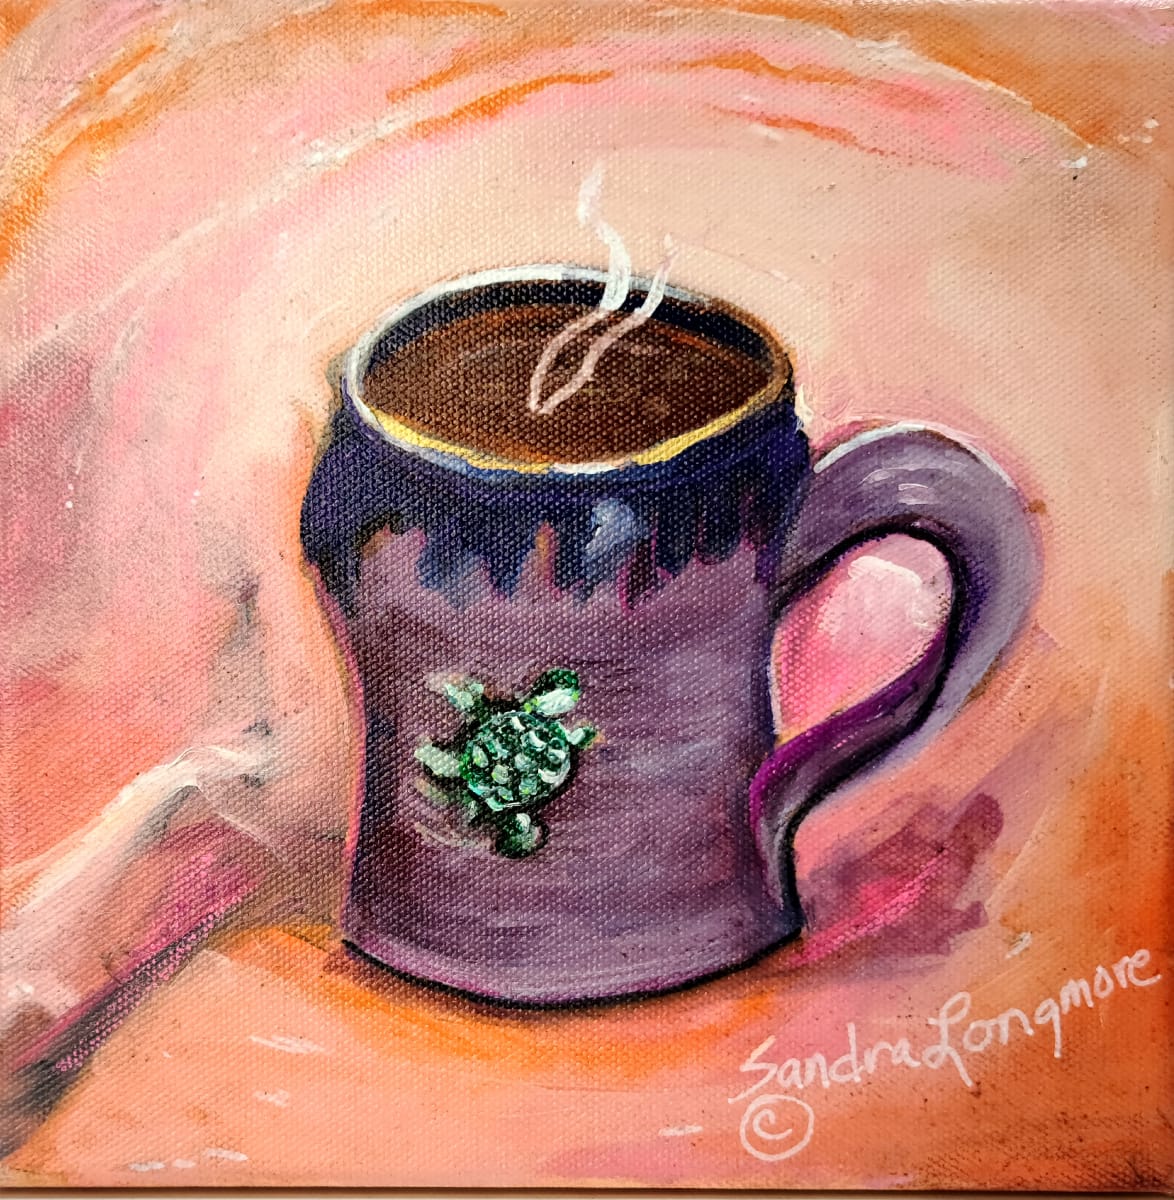 "Have a Cuppa" by Sandra Longmore  Image: "Have a Cuppa"